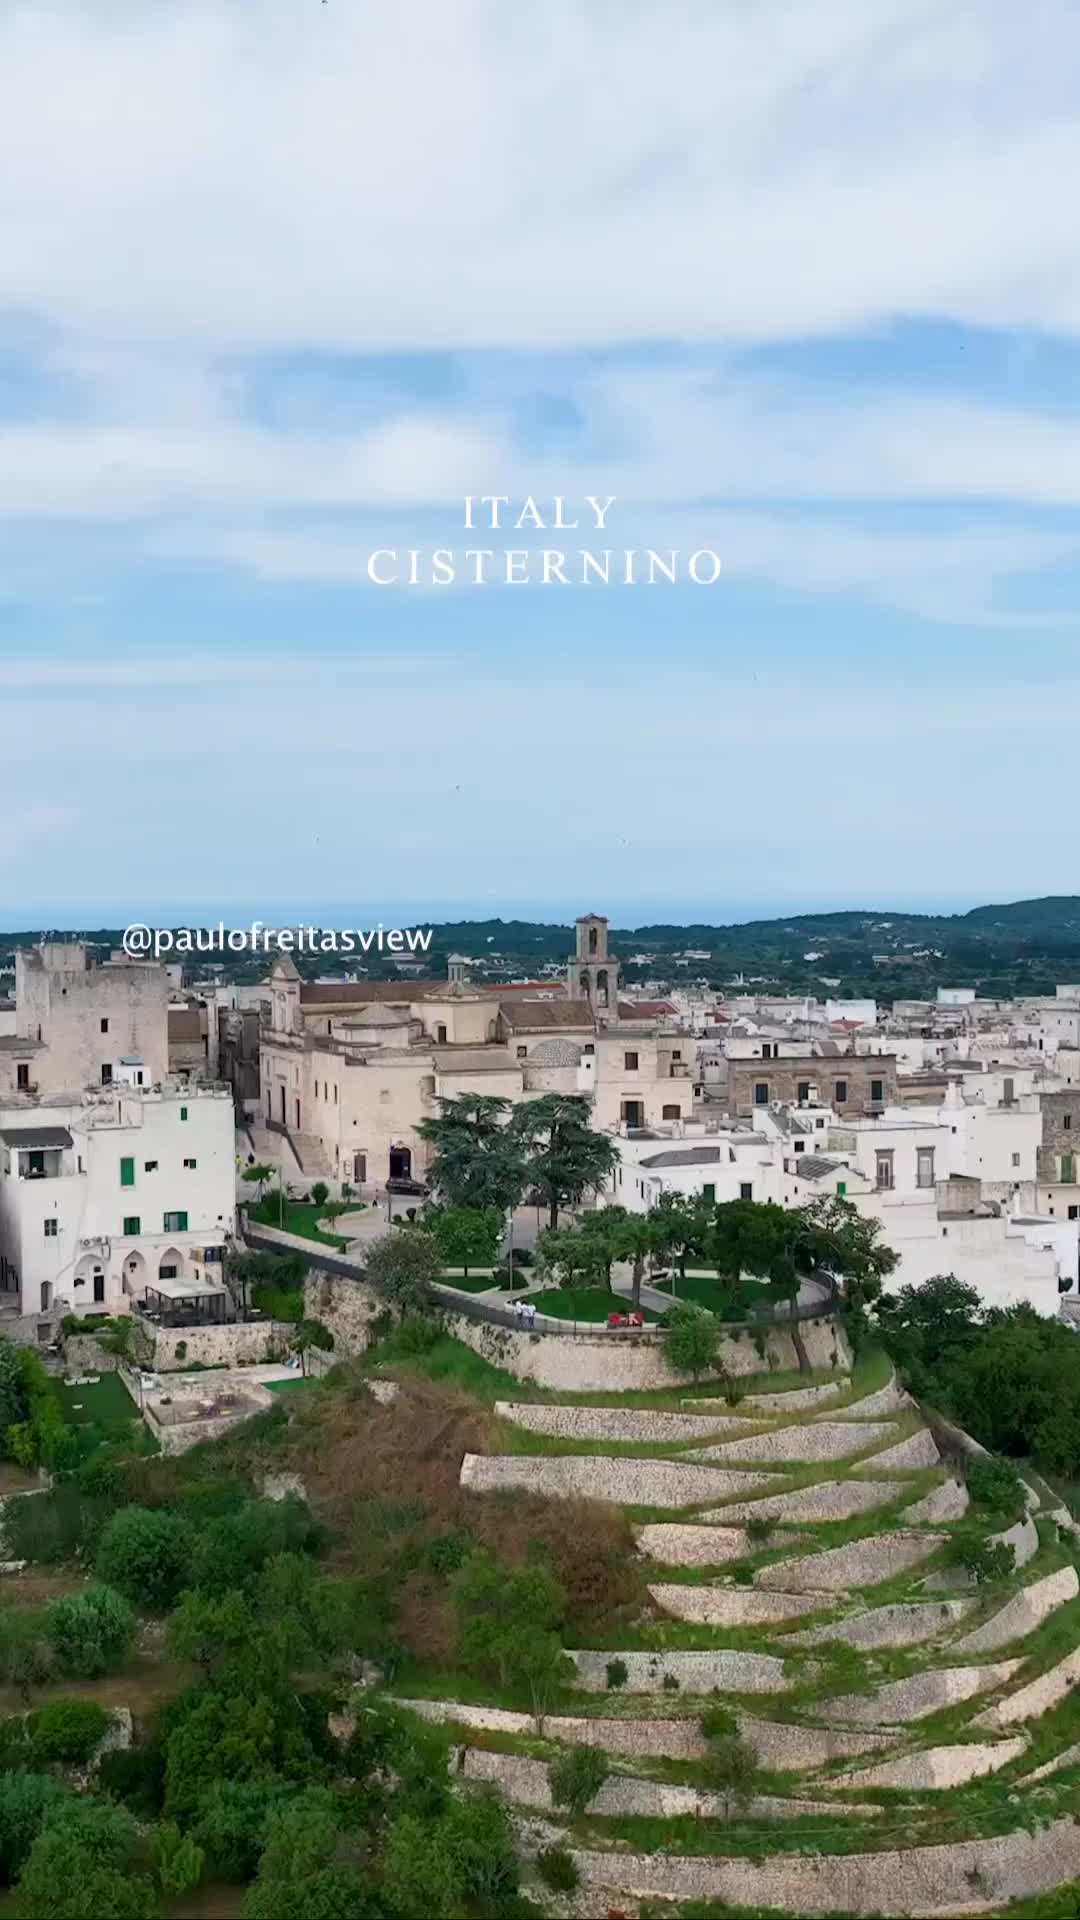 📍Cisternino, Italy 🇮🇹.Venturing into the heart of Italy with my trusty sidekick, Noah 🧸. Cisternino’s charm is undeniable, showcasing why it’s listed among Italy’s most enchanting villages. Dive into our journey and let the beauty of Apulia captivate your heart! ❤️🇮🇹 #CisterninoAdventures #WanderlustWithNoah #borghi #puglia #brindisi #cisternino #noah